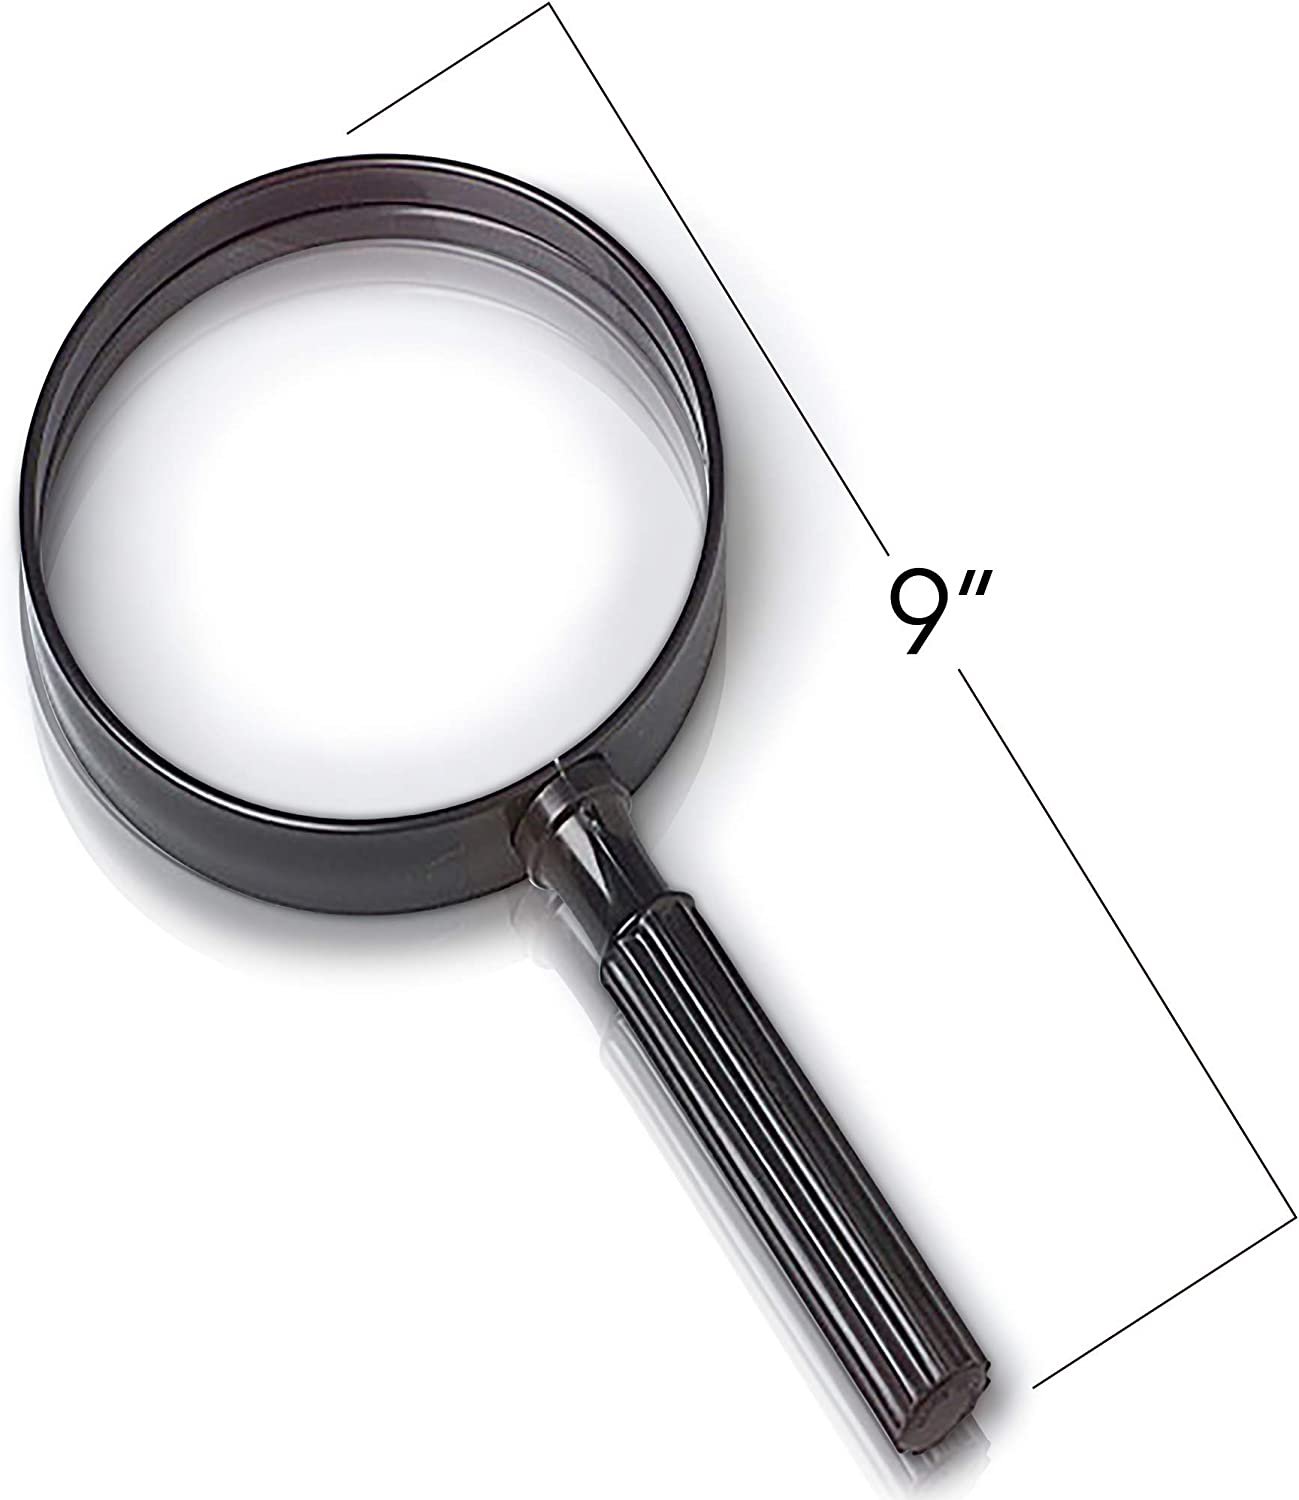 Giant Kids Magnifying Glass - 9" Jumbo Magnifier - Fun Young Explorer and Adventure Toys for Boys and Girls, Spy Costume Prop, Great Gift Idea or Party Favor for Children